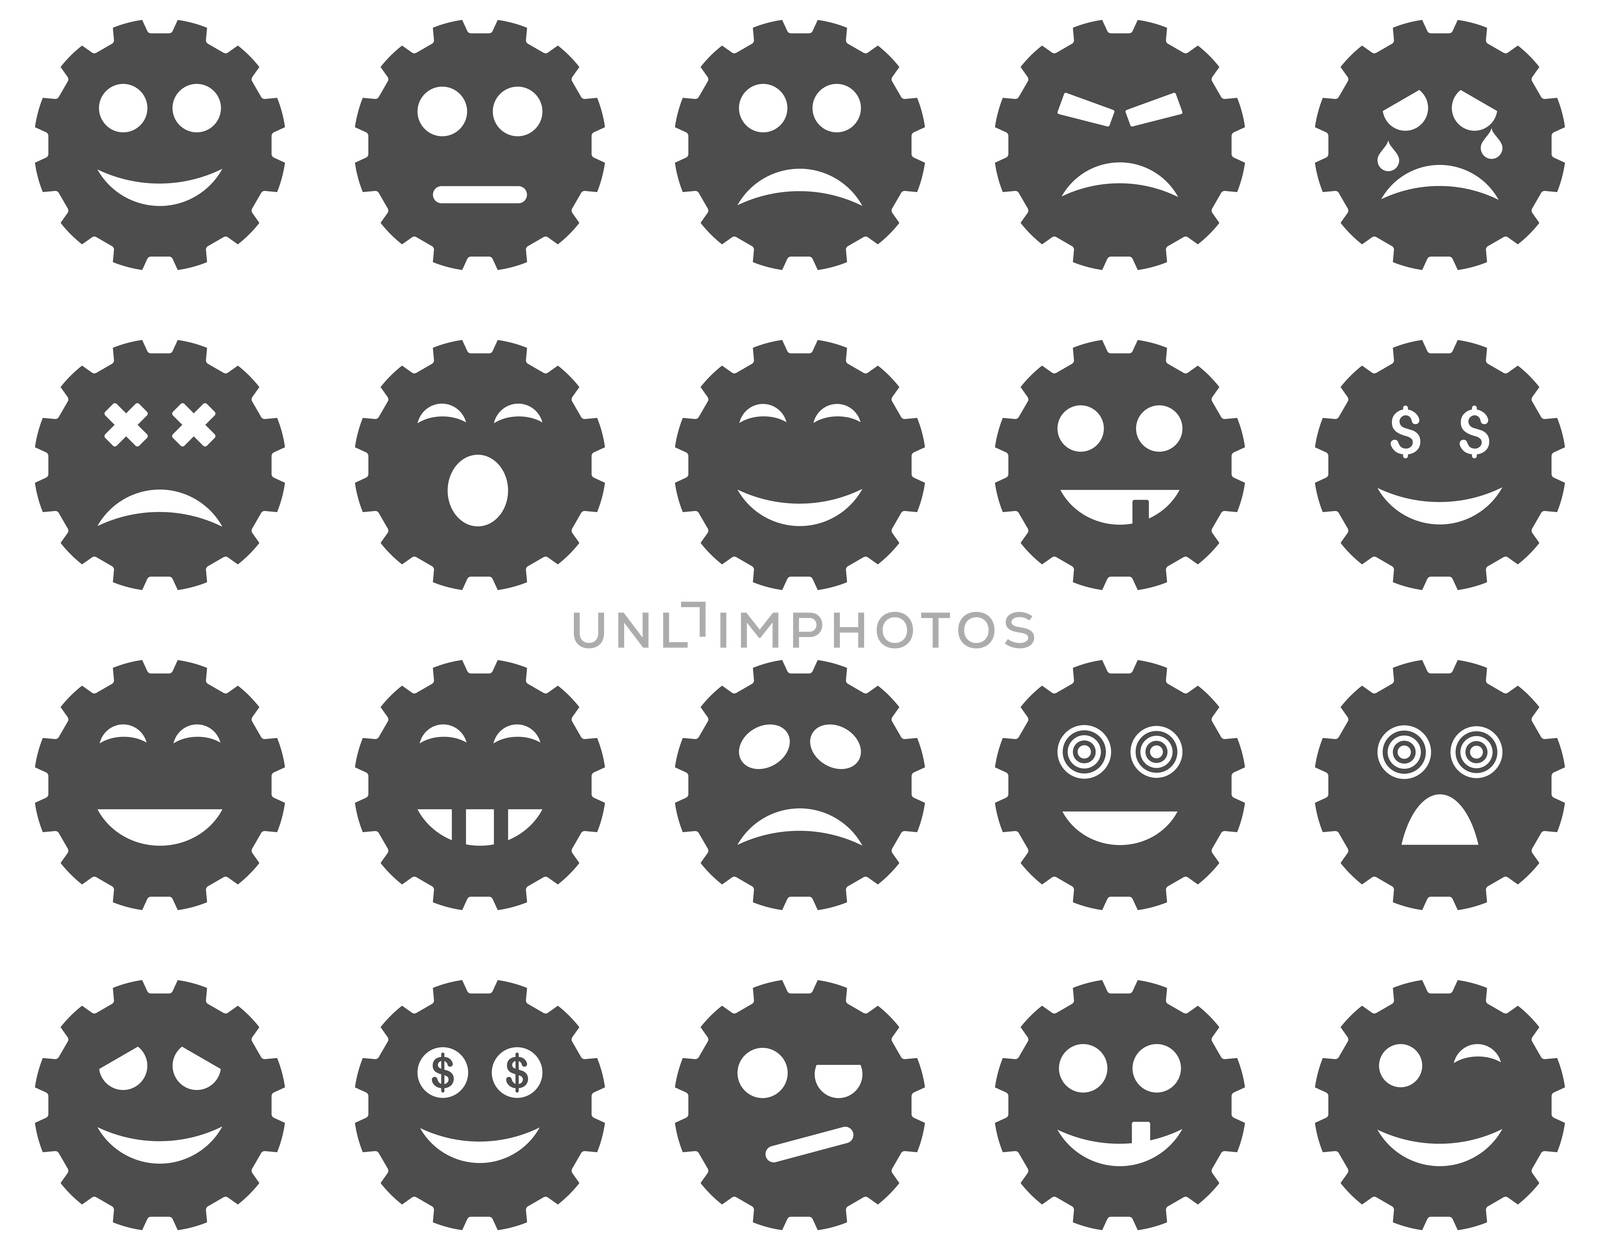 Gear emotion icons. Glyph set style is flat images, gray symbols, isolated on a white background.